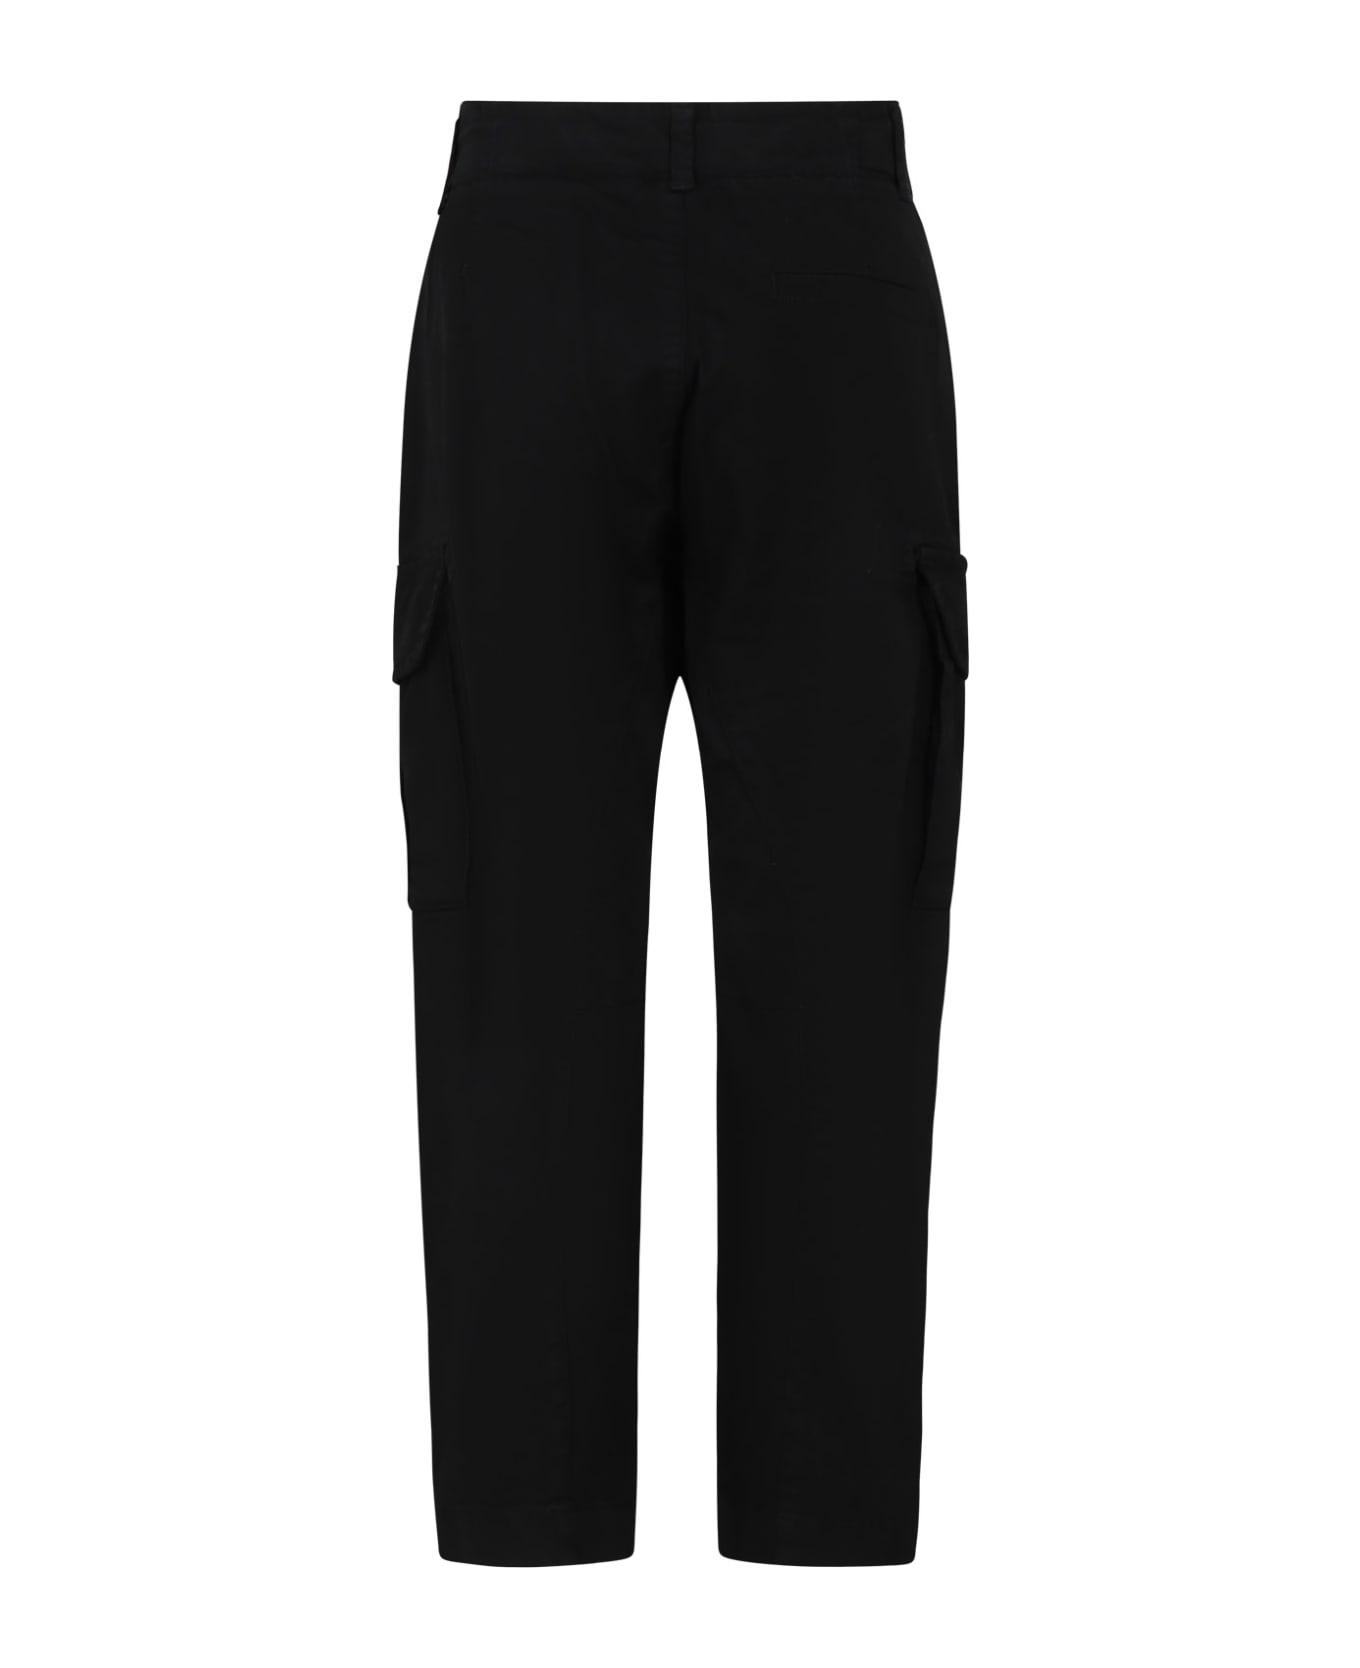 C.P. Company Undersixteen Black Trousers For Boy With C.p. Company Lens. - Black